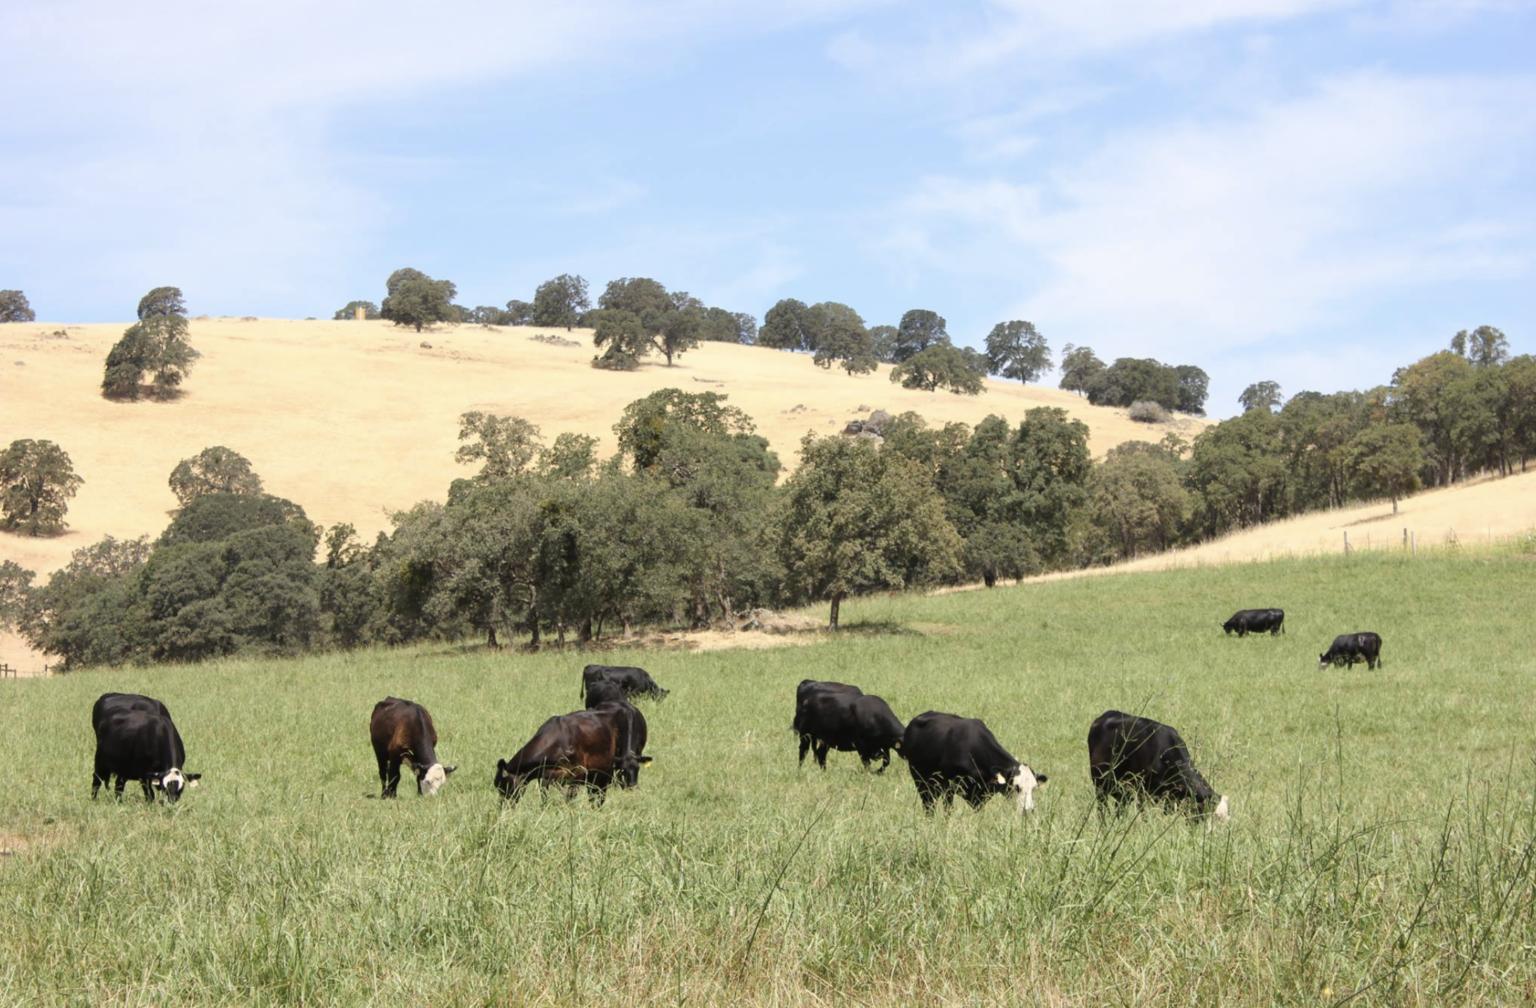 cattle grazing on a grassland with dry hillsides in the disatance